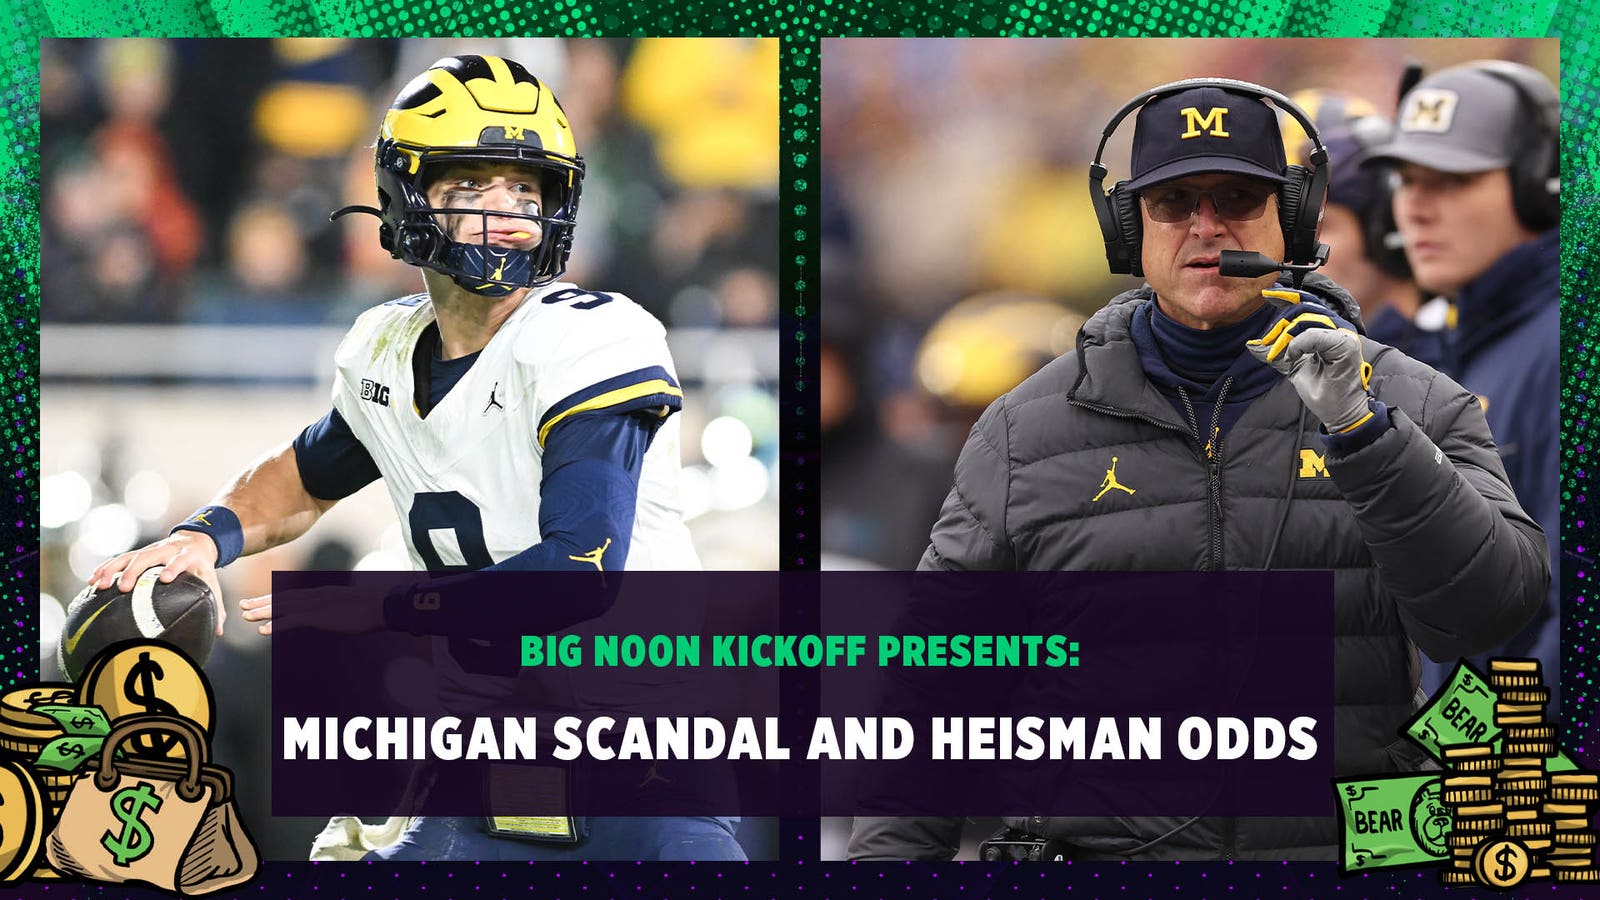 Could Michigan’s scandal affect Heisman votes for J.J. McCarthy? 